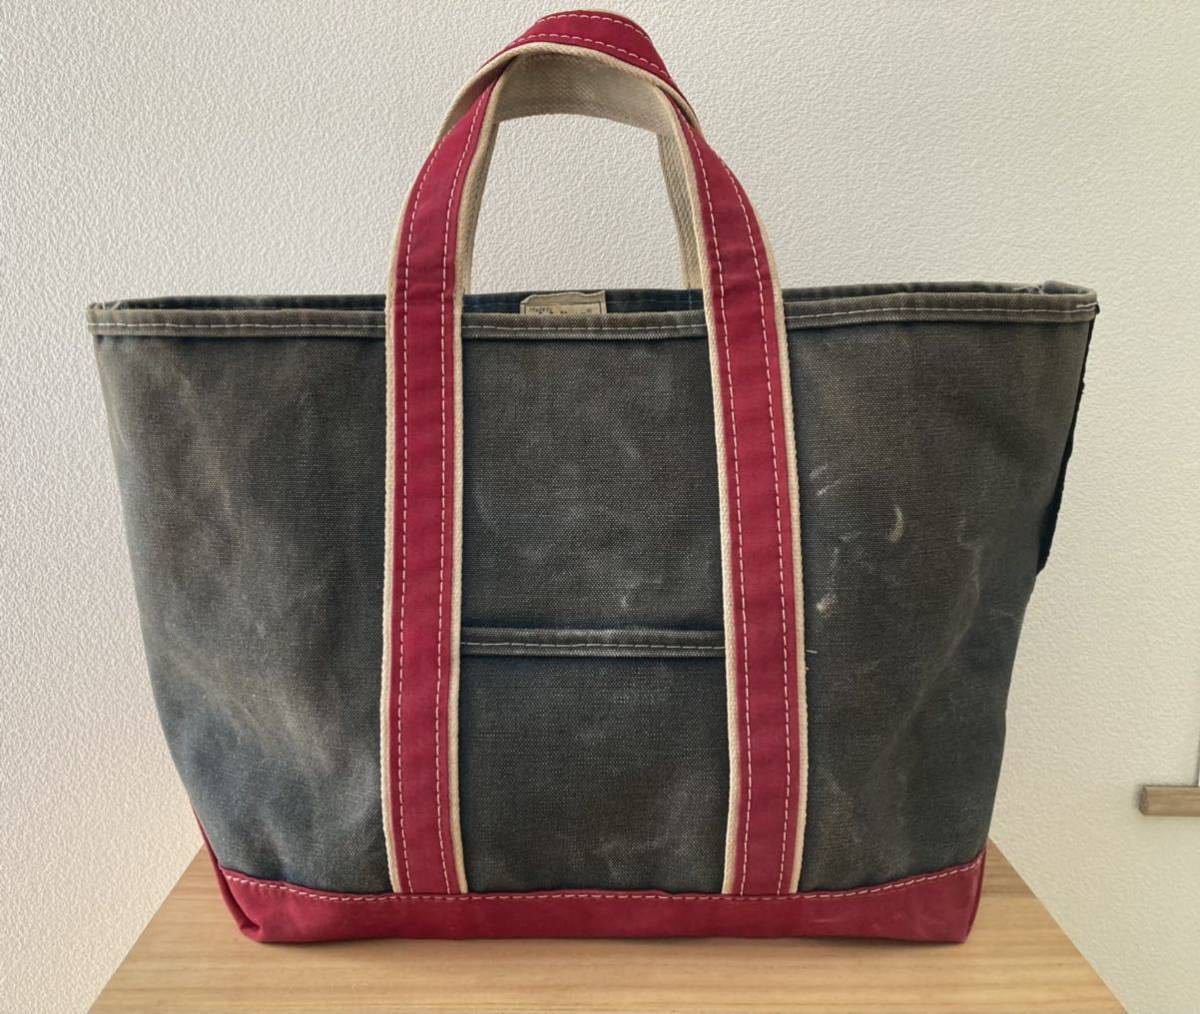 1980's L.L.Bean DELUXE BOAT AND TOTE LARGE MADE IN USAヴィンテージビンテージ エルエルビーンキャンバストートバッグ レッド ネイビー_画像2